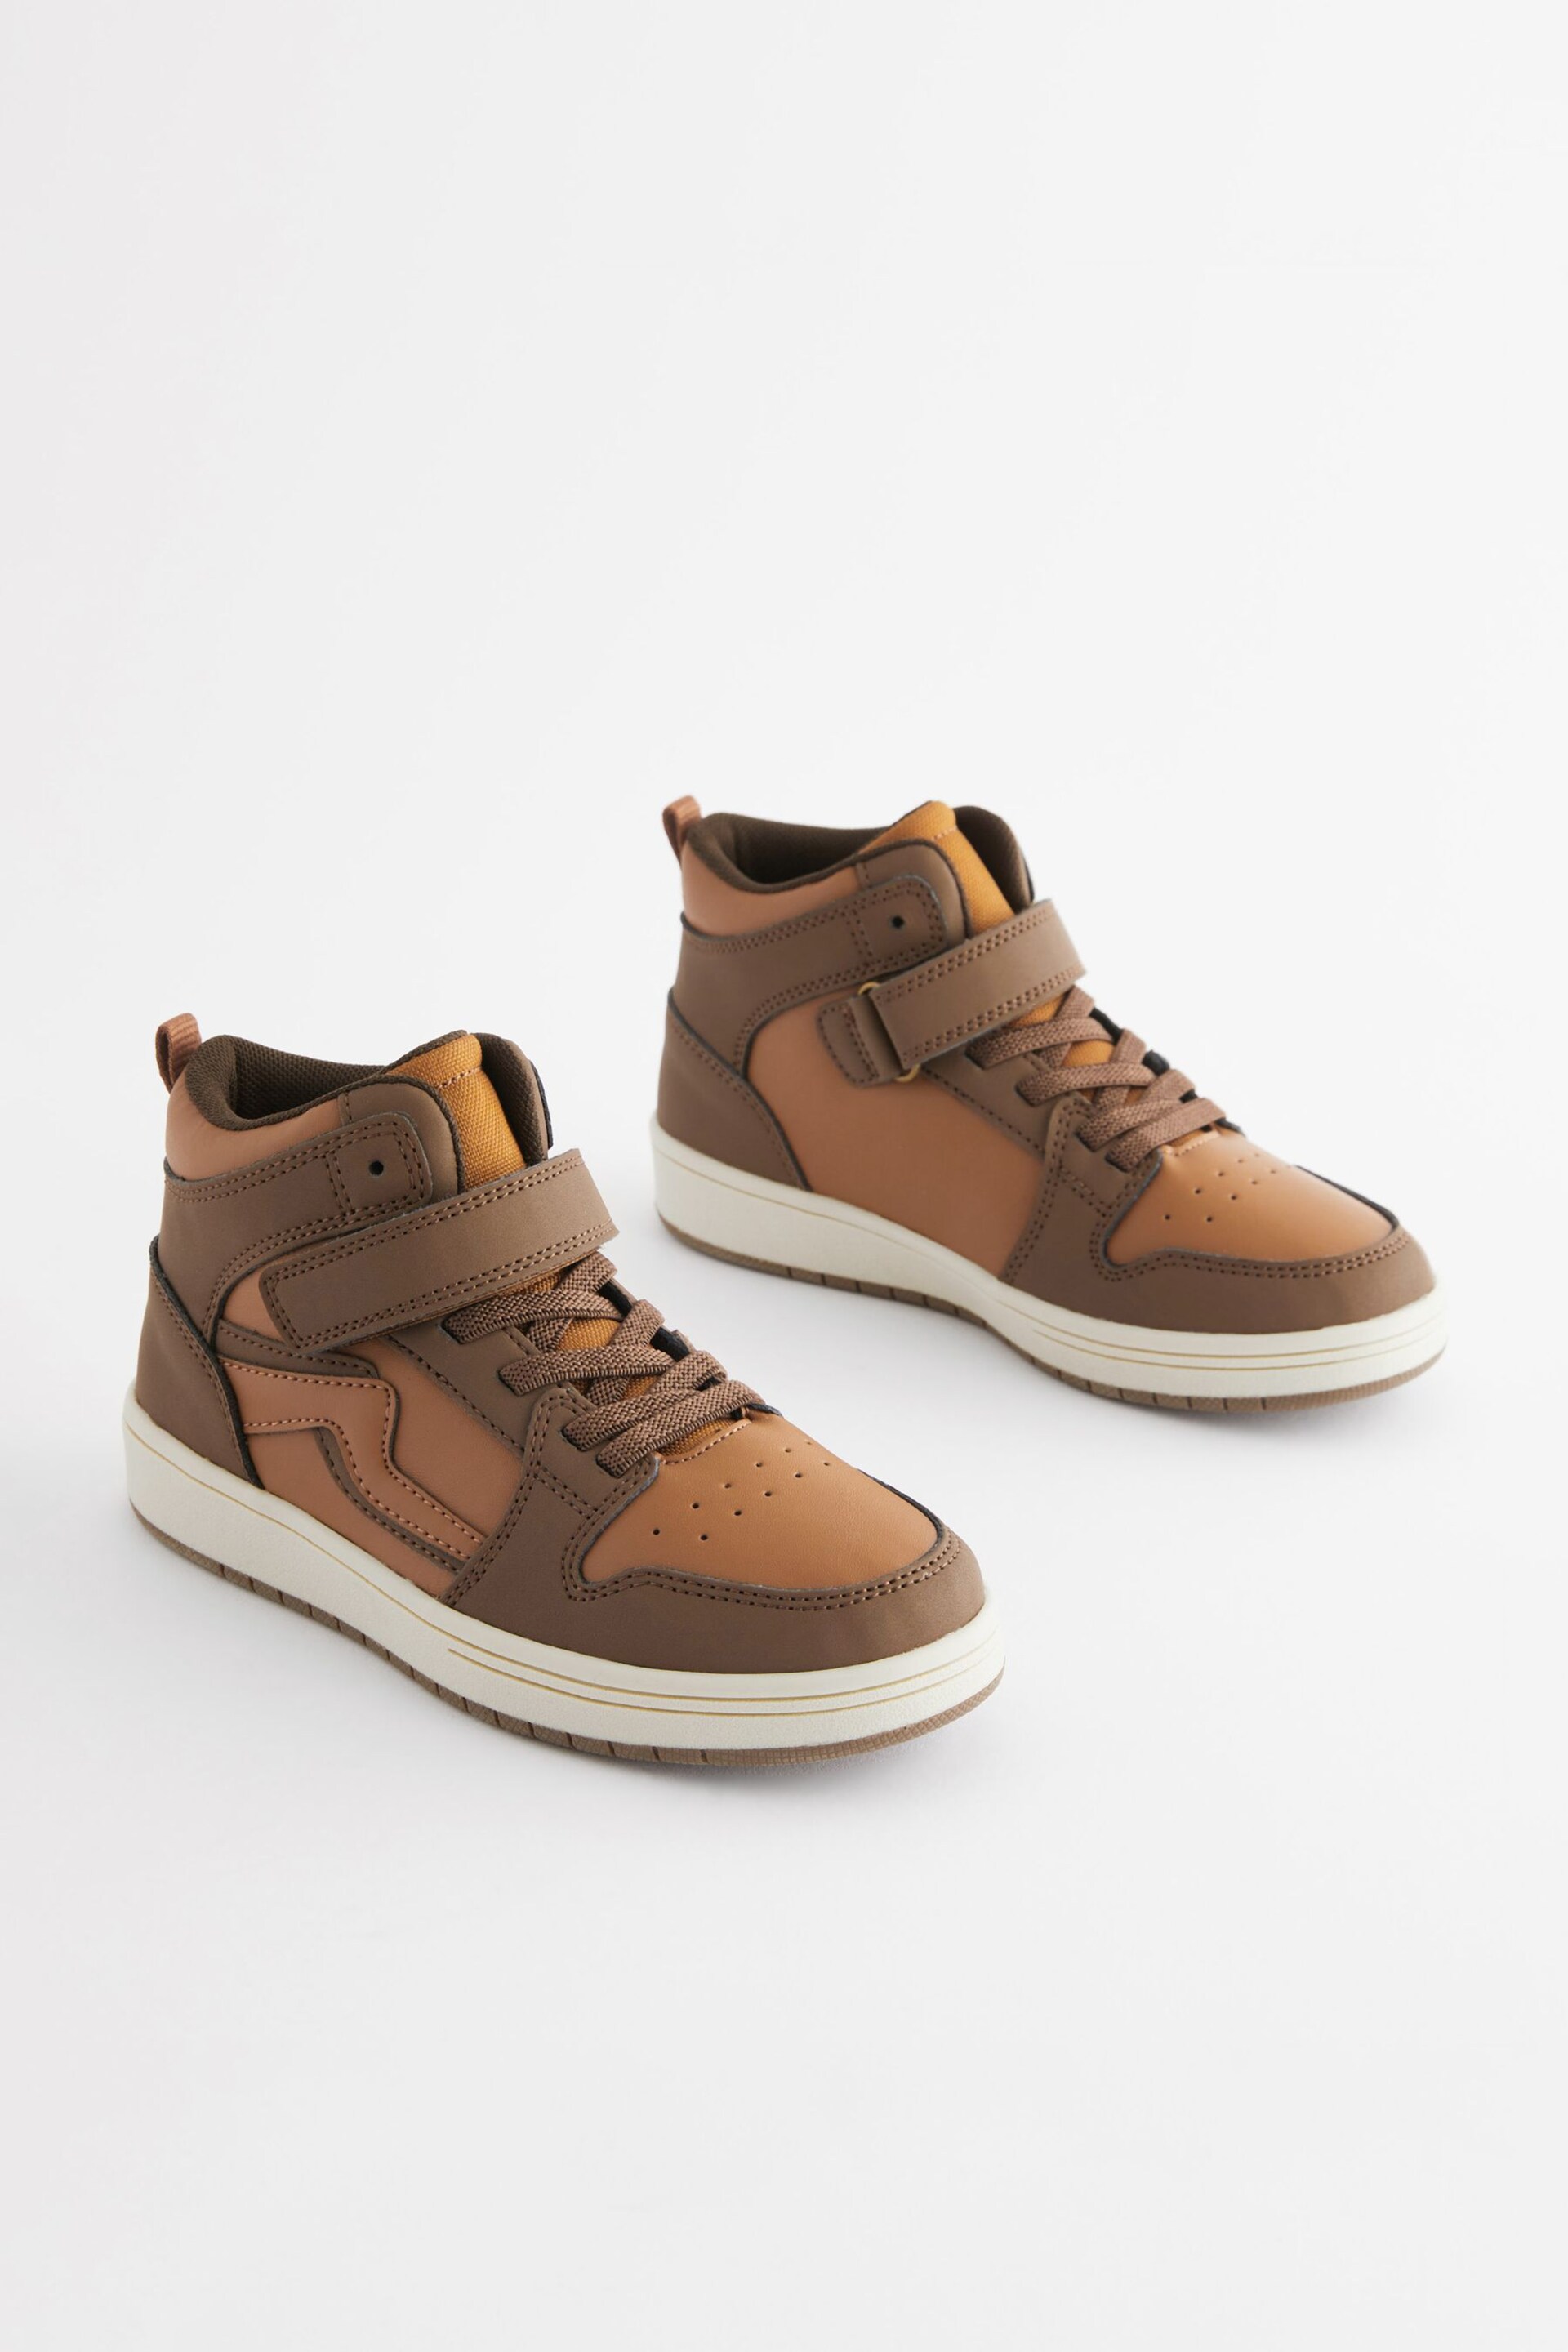 Brown Elastic Lace High Top Trainers - Image 1 of 5